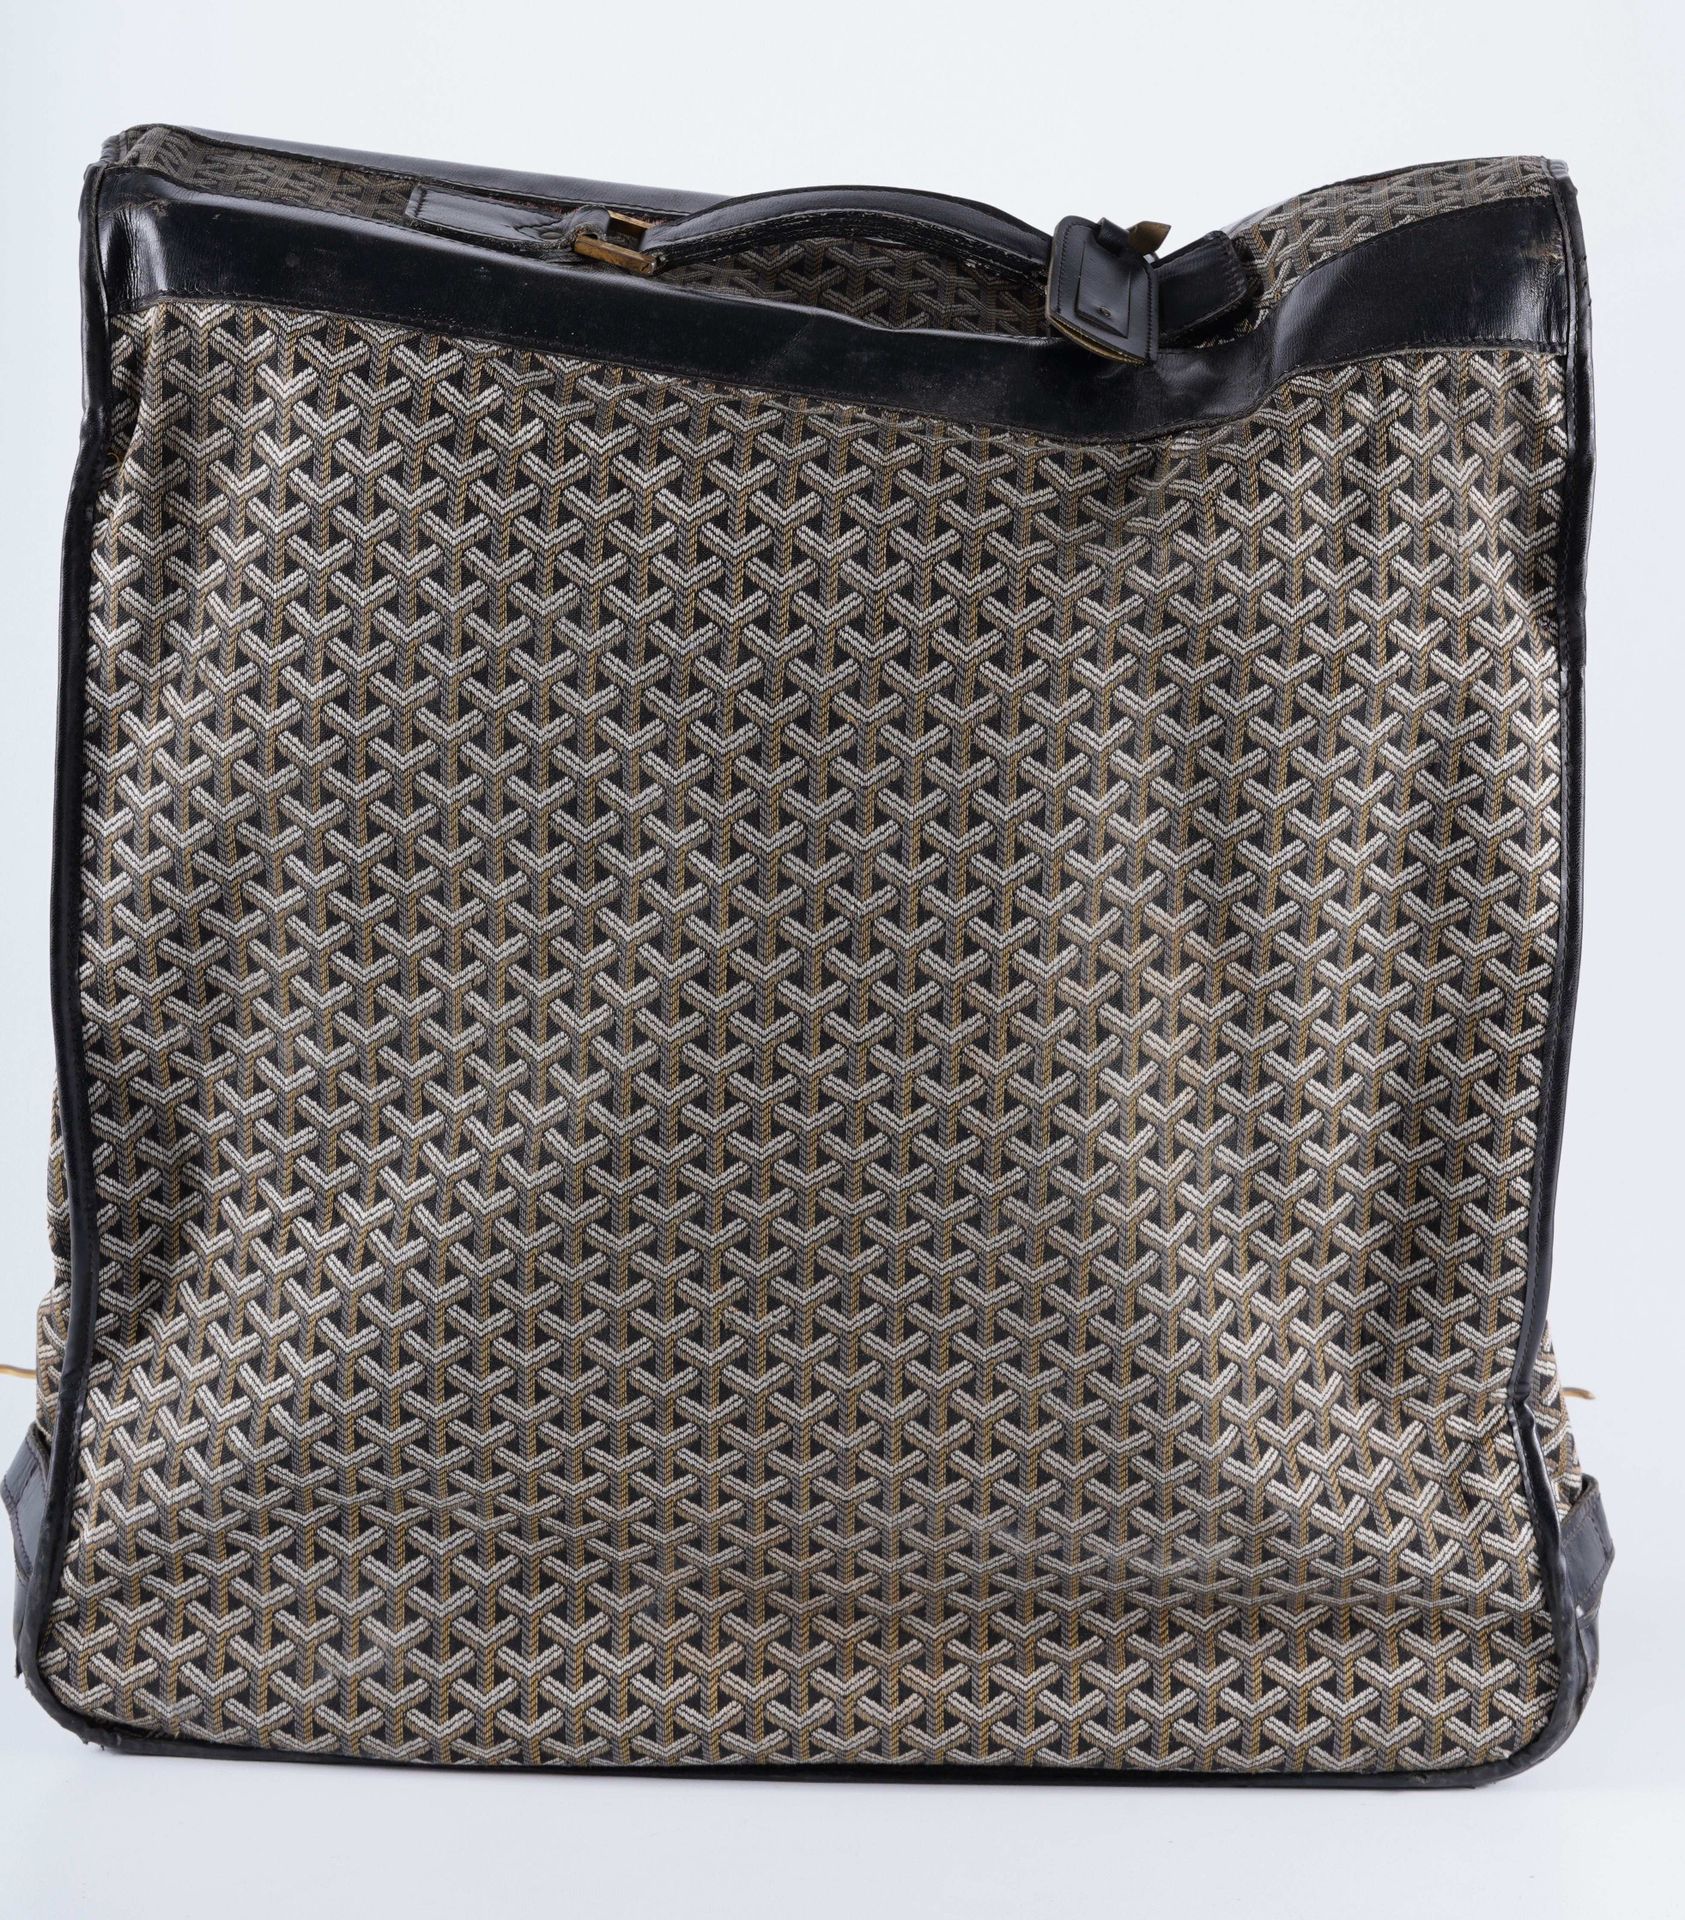 GOYARD Suitcase, Mayfair model, with integrated hangers, brown leather and Goyar&hellip;